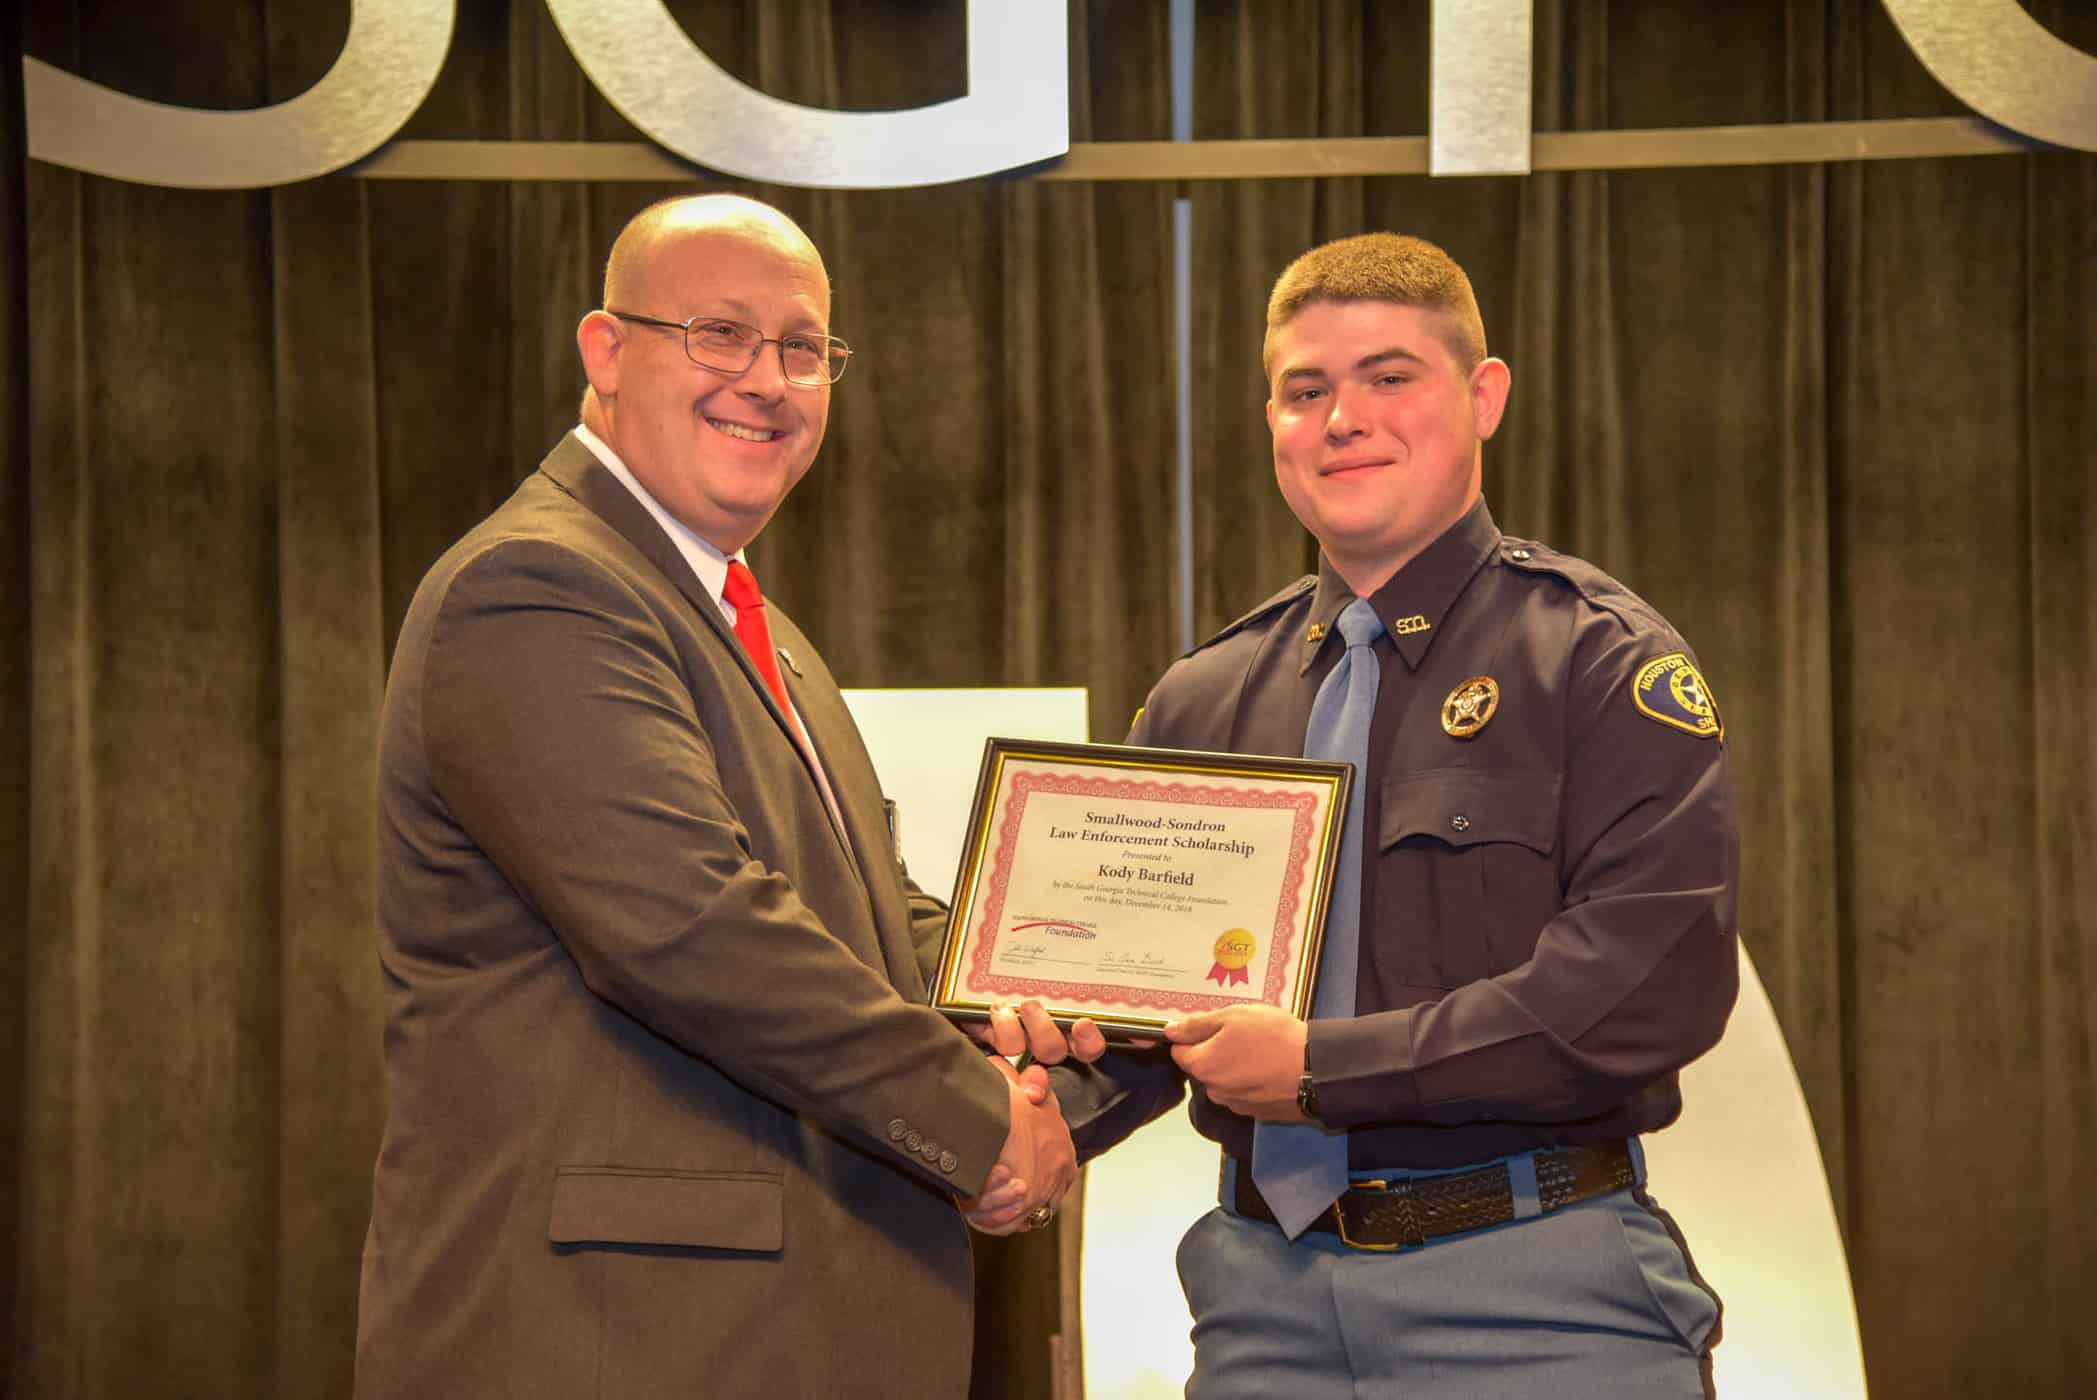 South Georgia Technical College Law Enforcement Academy Director Brett Murray is shown above presenting Kody Barfield with the Smallwood-Sondron Law Enforcement Academy Scholarship.